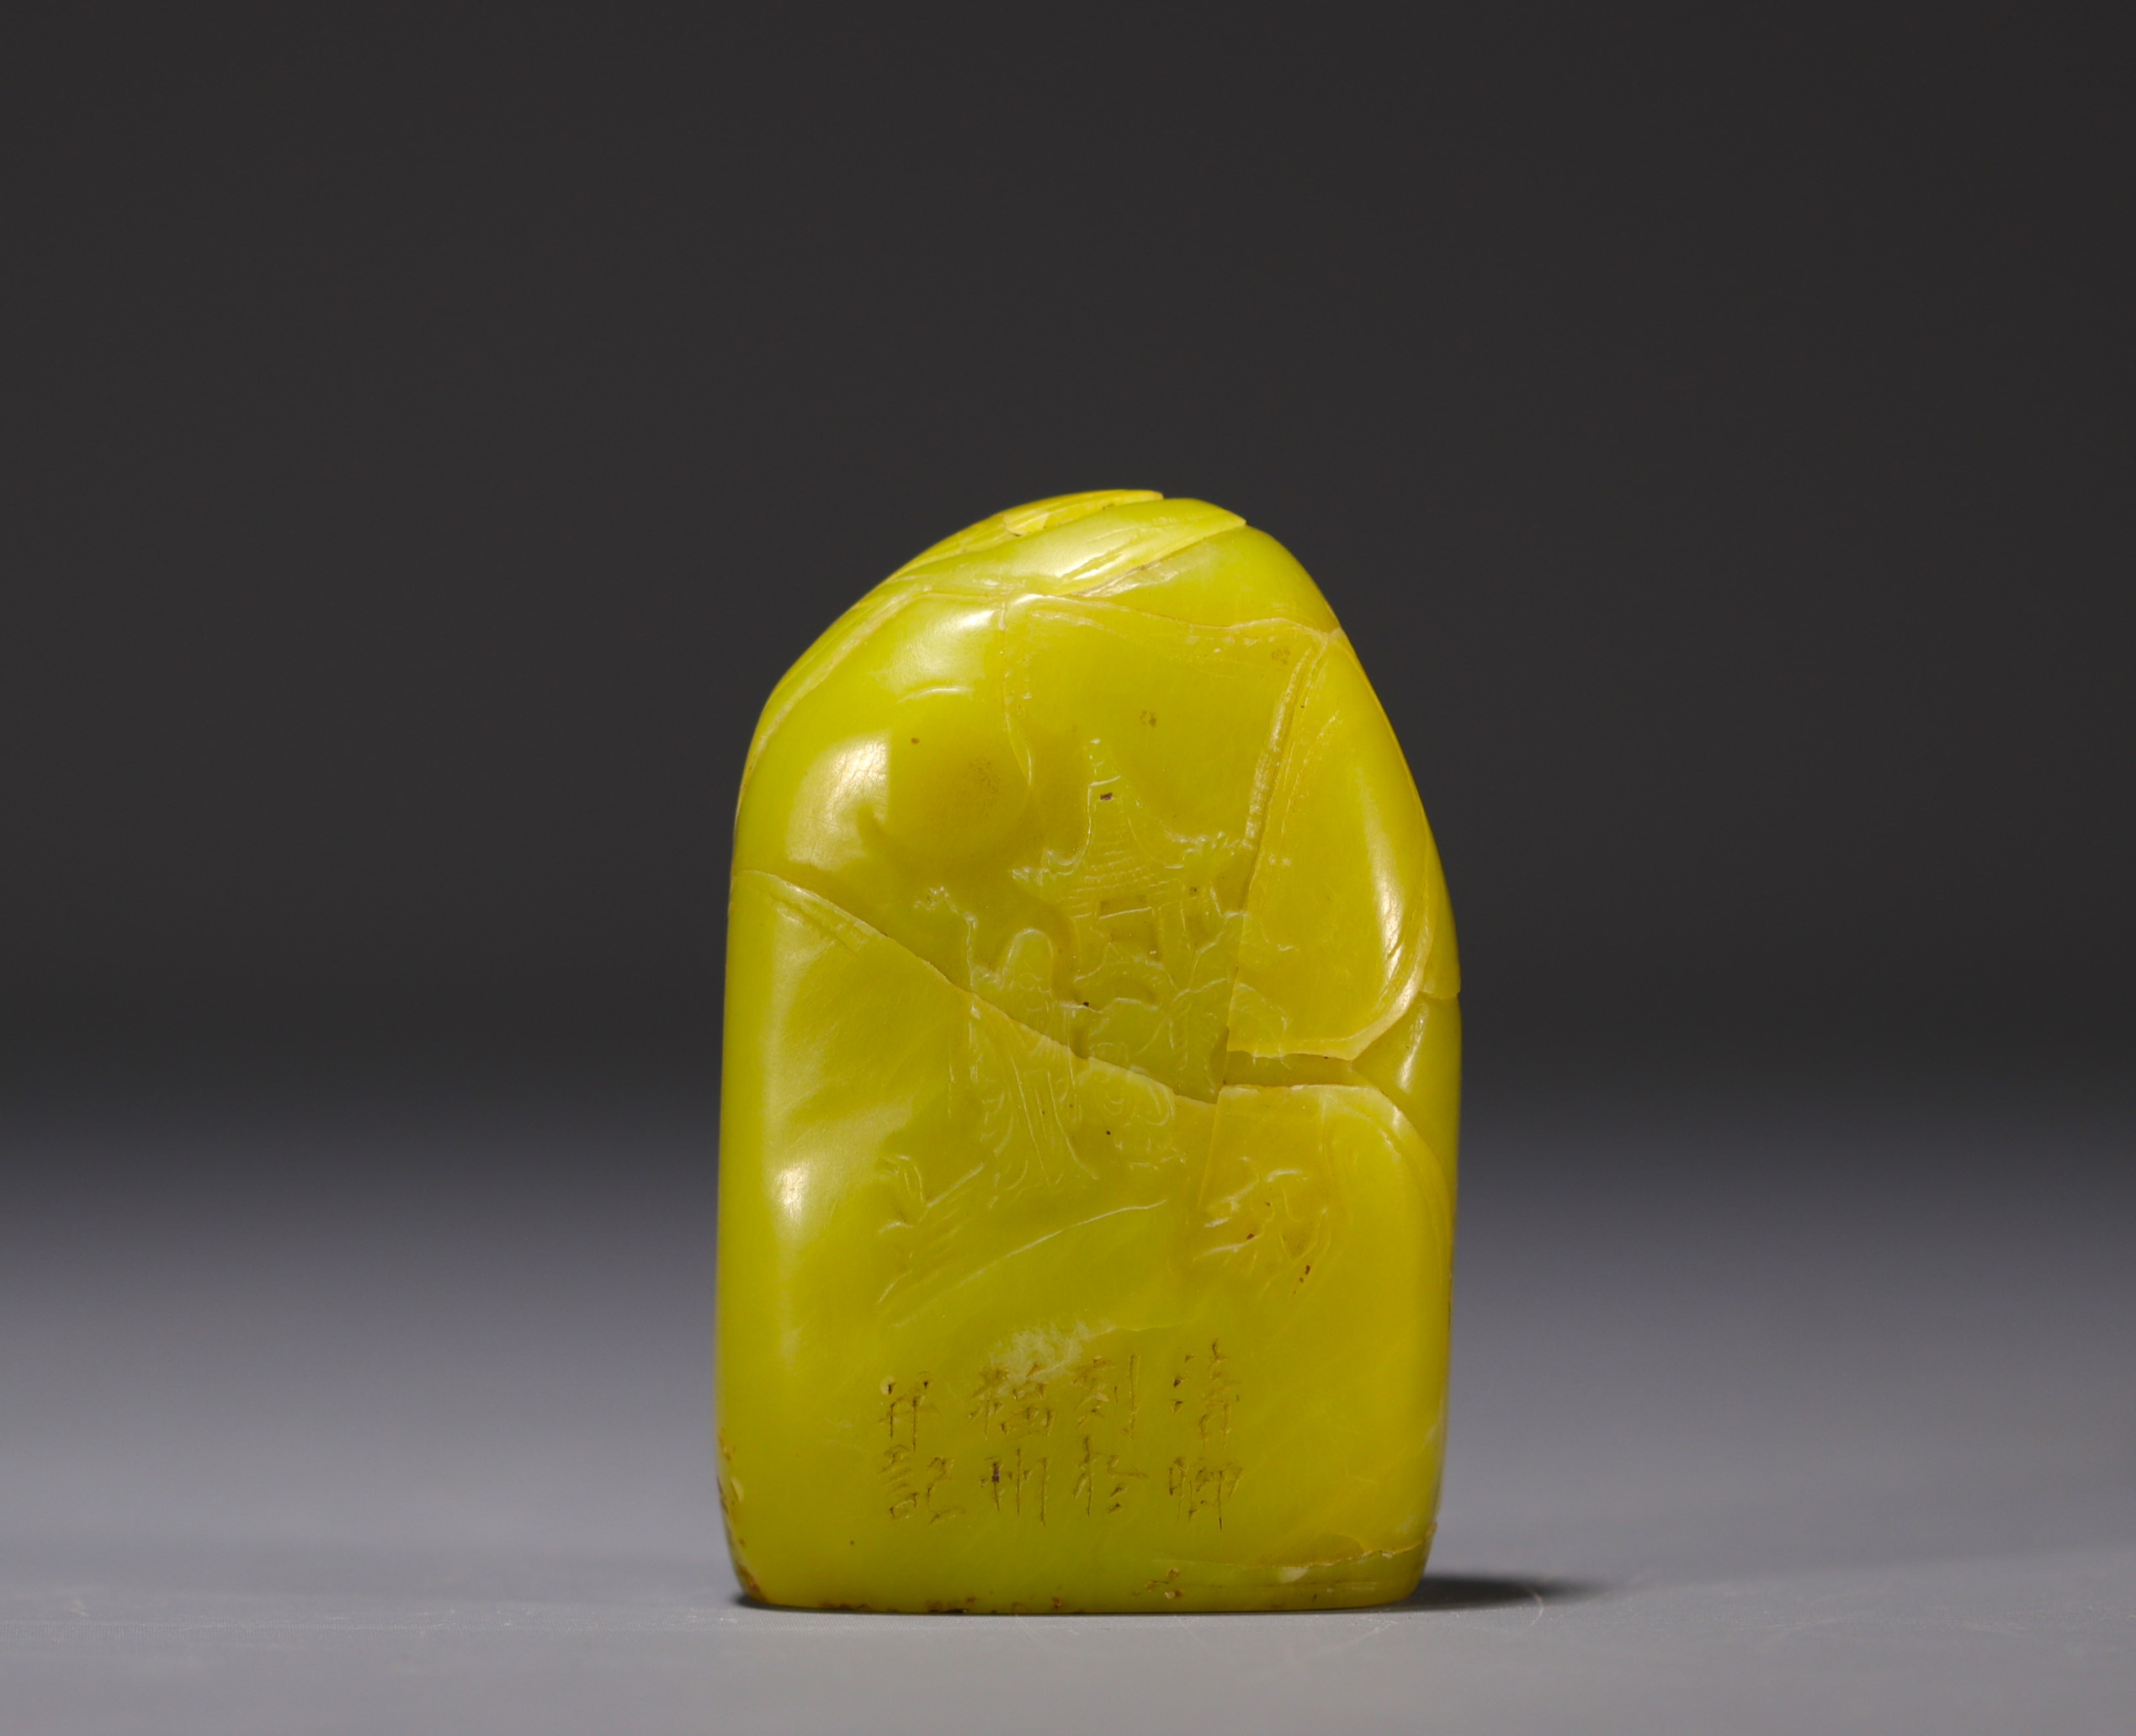 China - Yellow stone seal carved with a figure in a landscape and engraved with a poem.